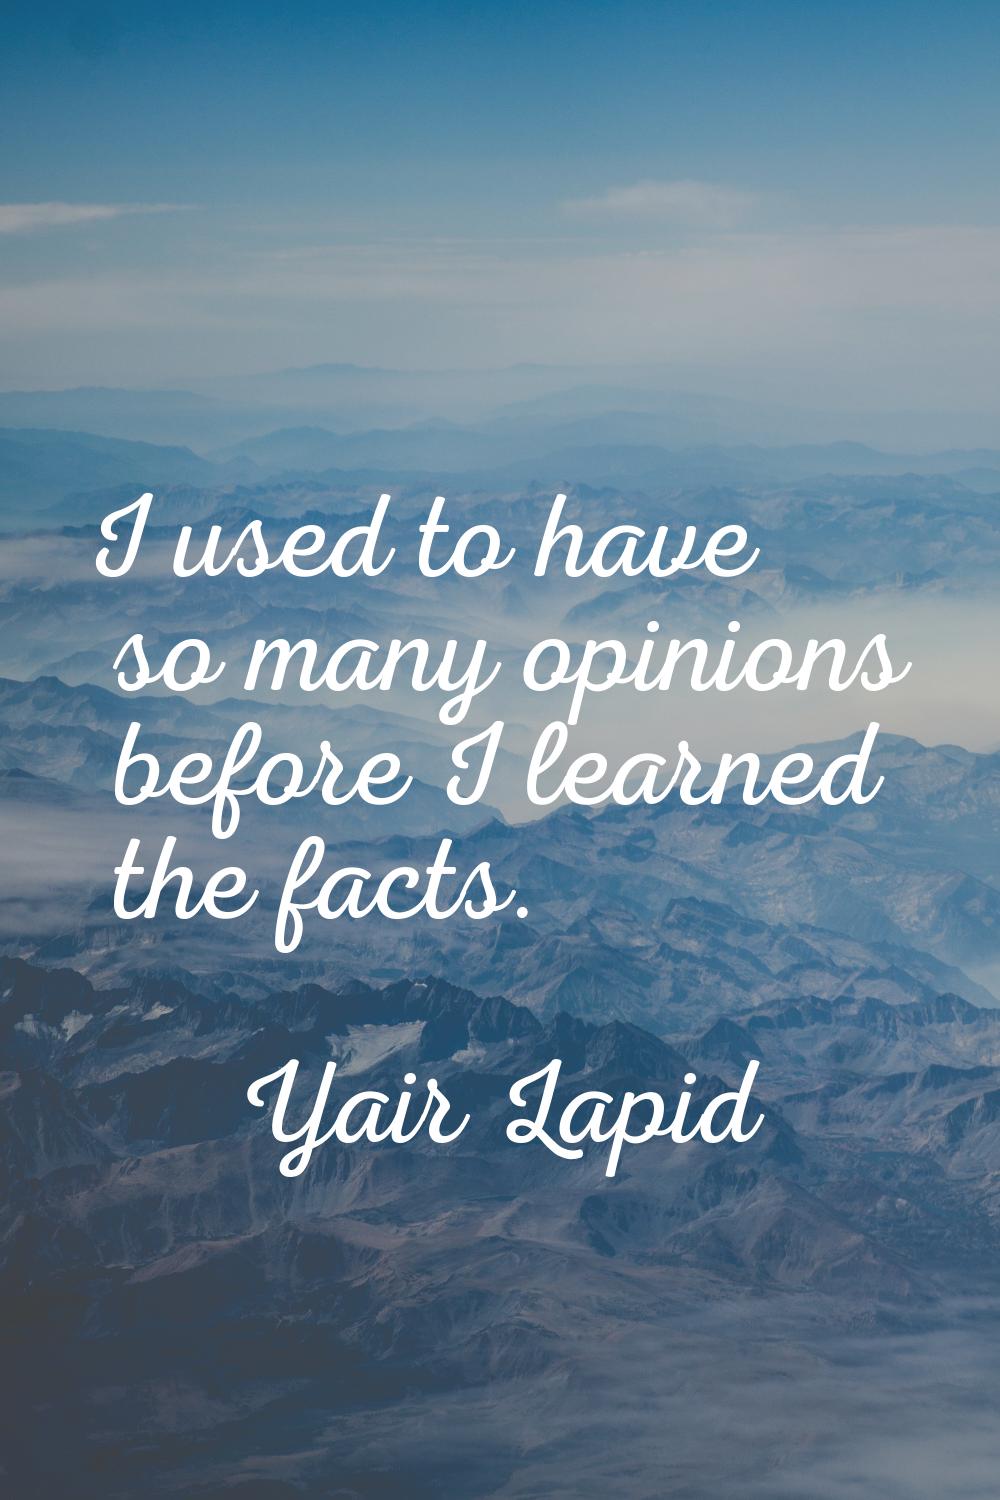 I used to have so many opinions before I learned the facts.